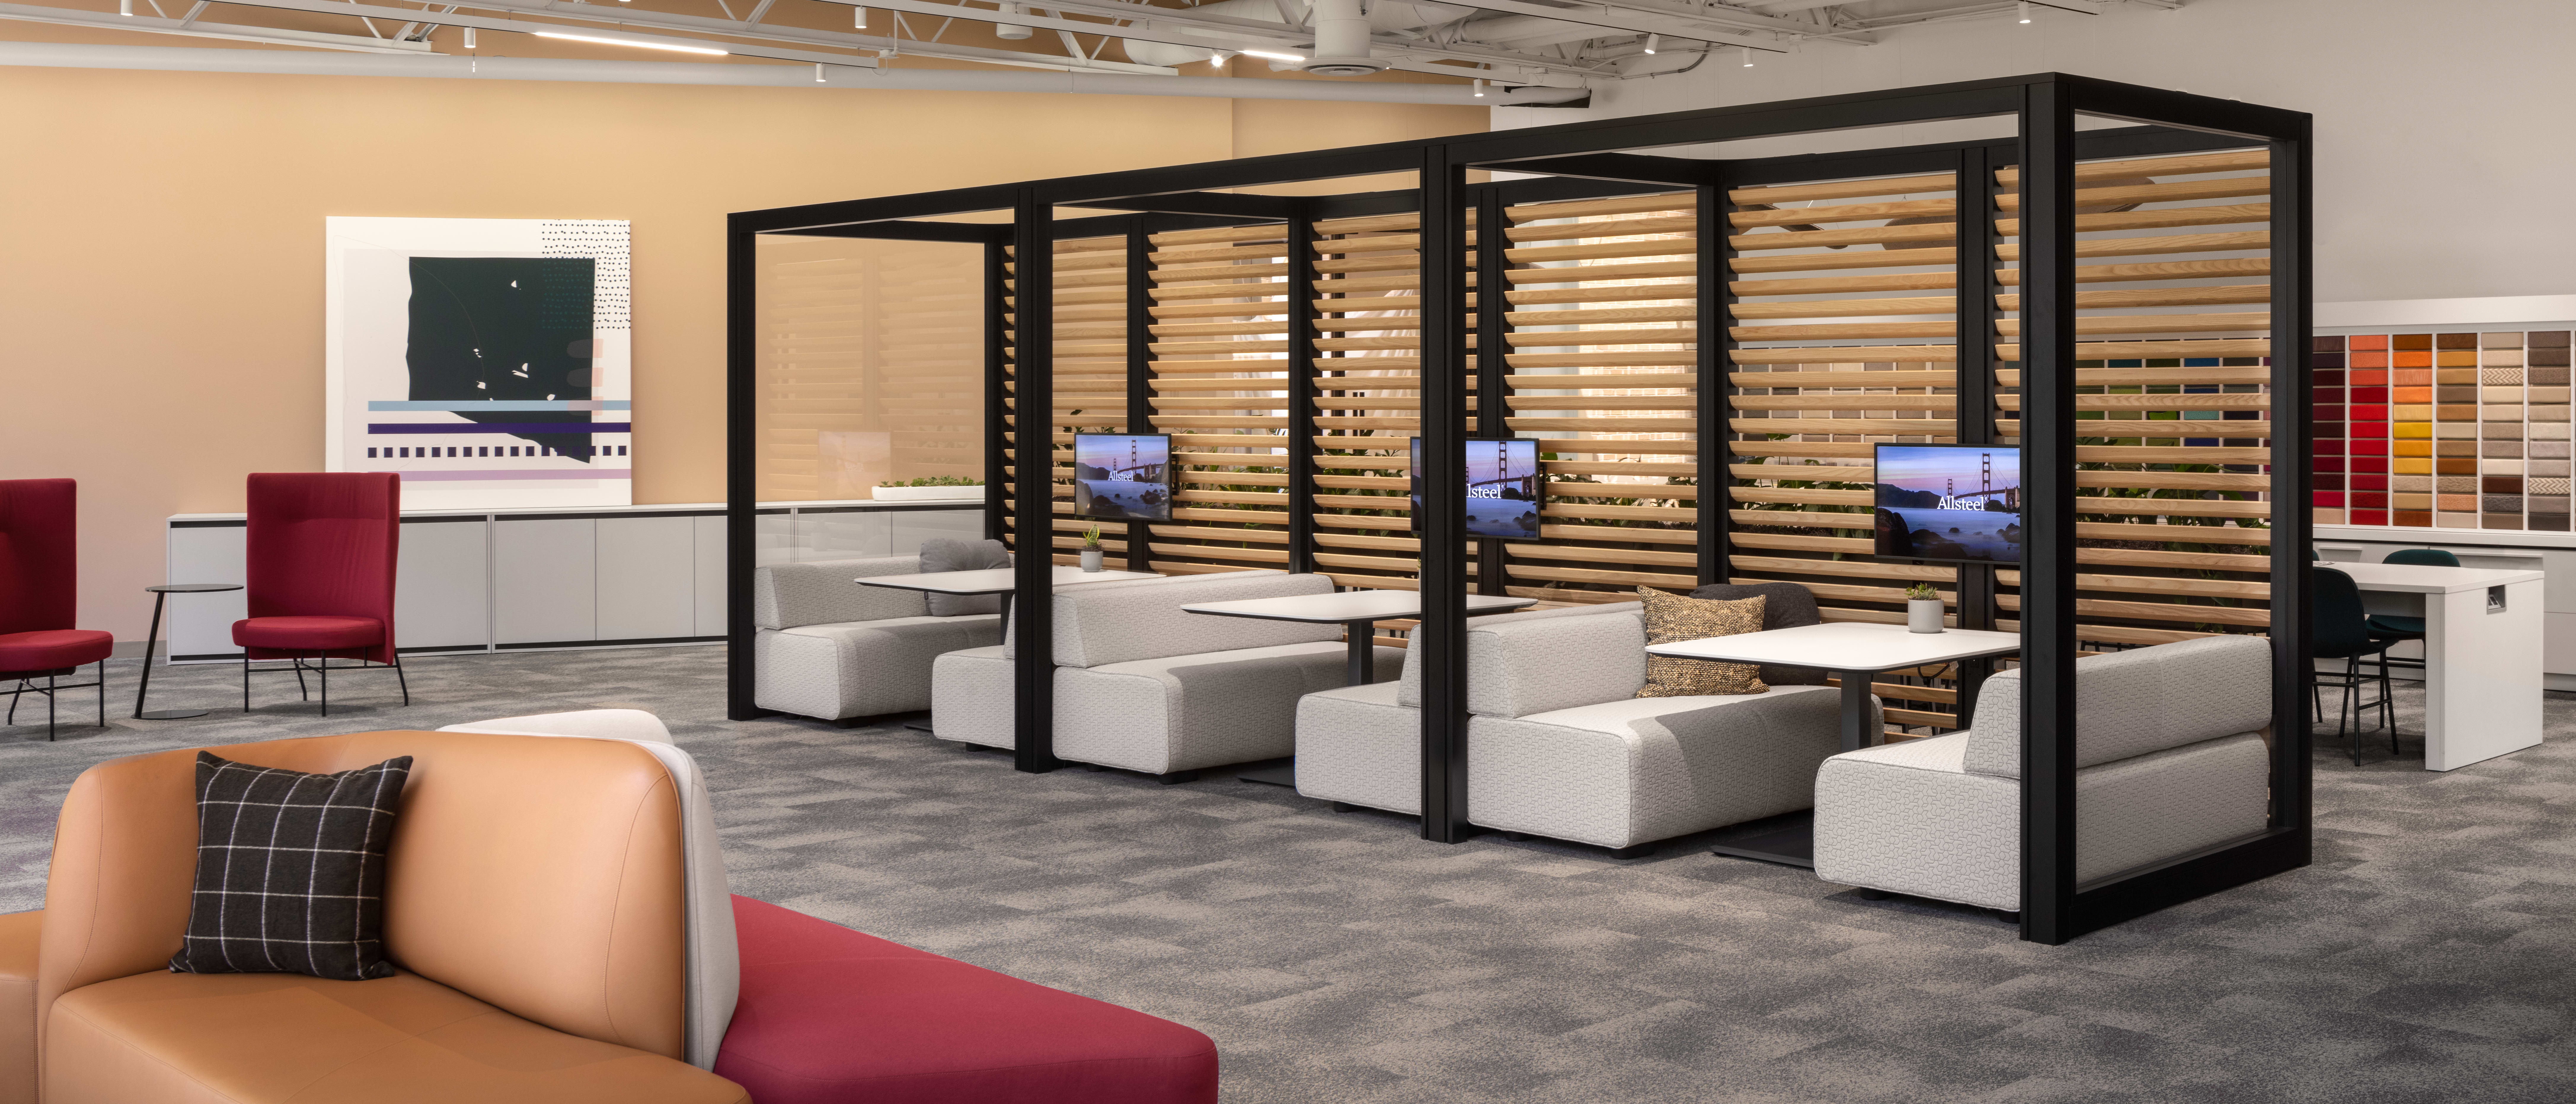 Open office commons with booth seating, technology, and lounge seating.